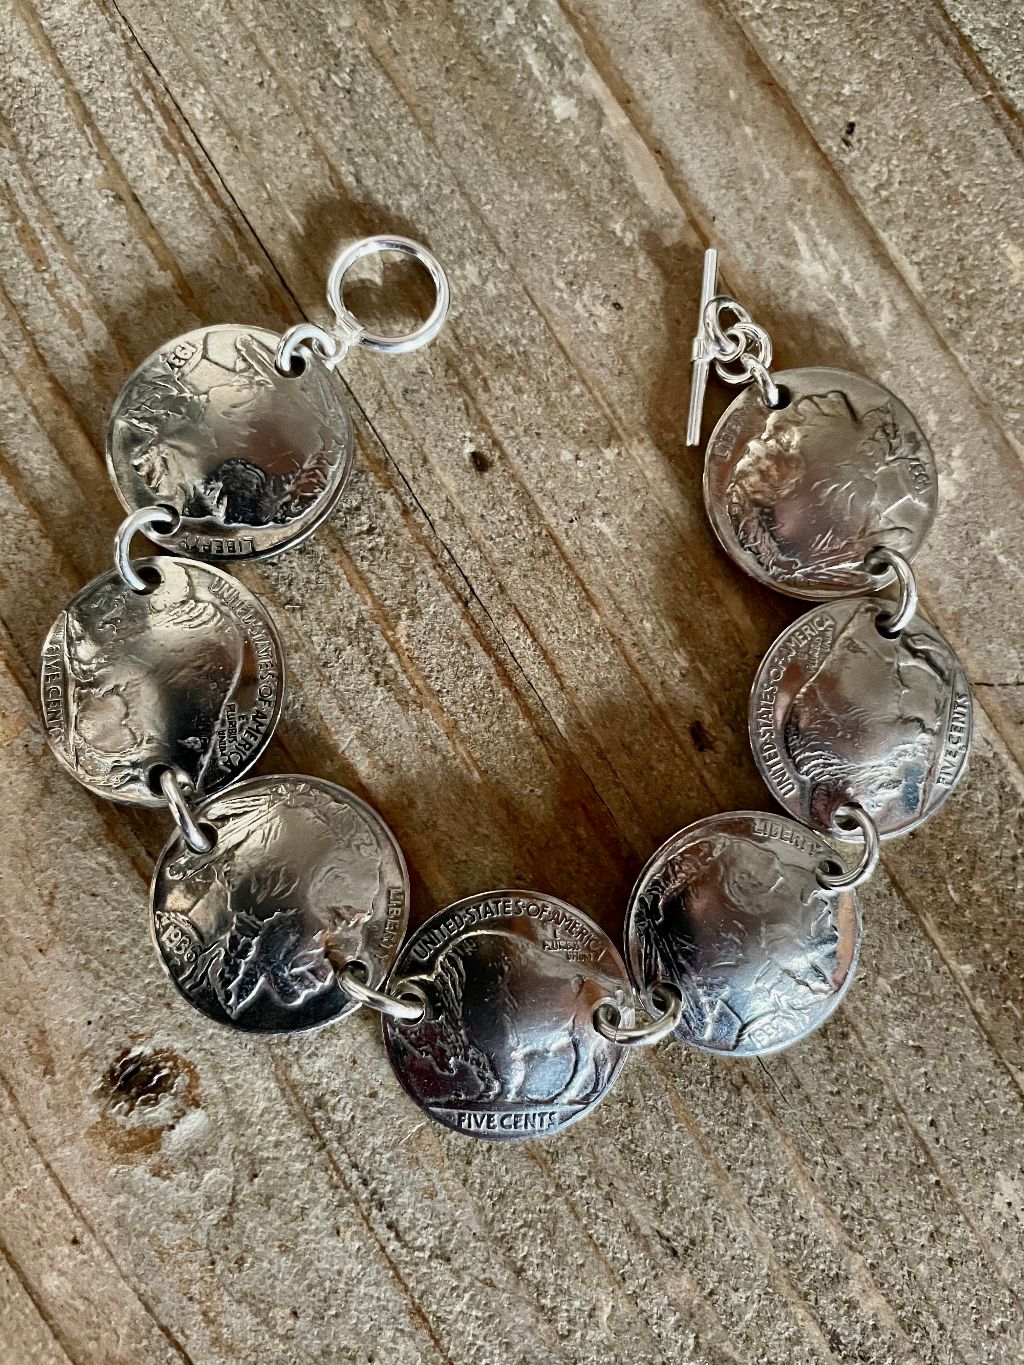 Nickel Jewelry and Why You Should Avoid It | Jewelry Guide